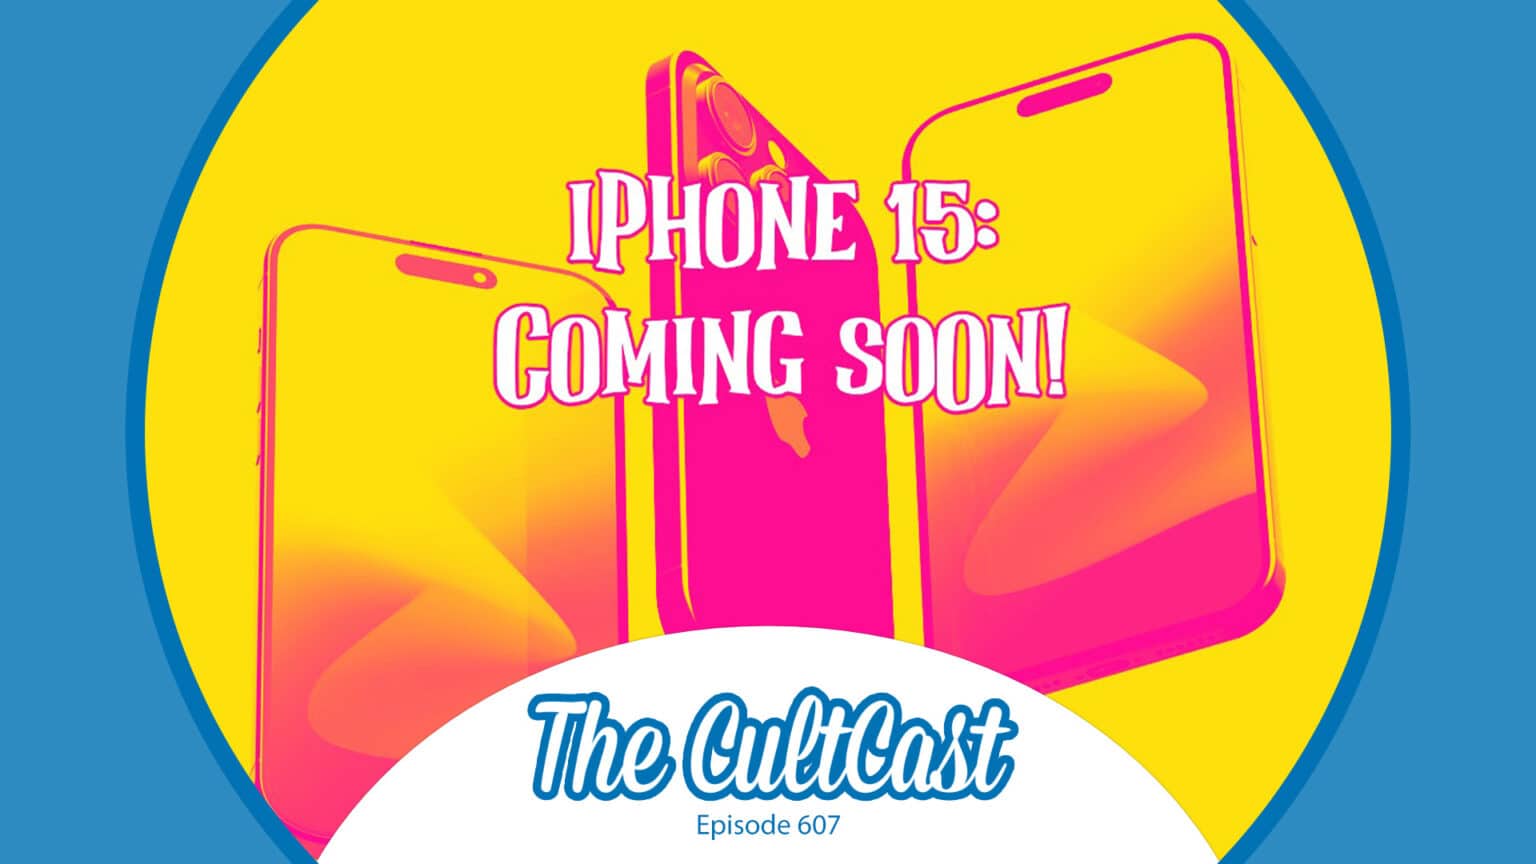 iPhone 15: Coming soon! The CultCast logo, episode 607.